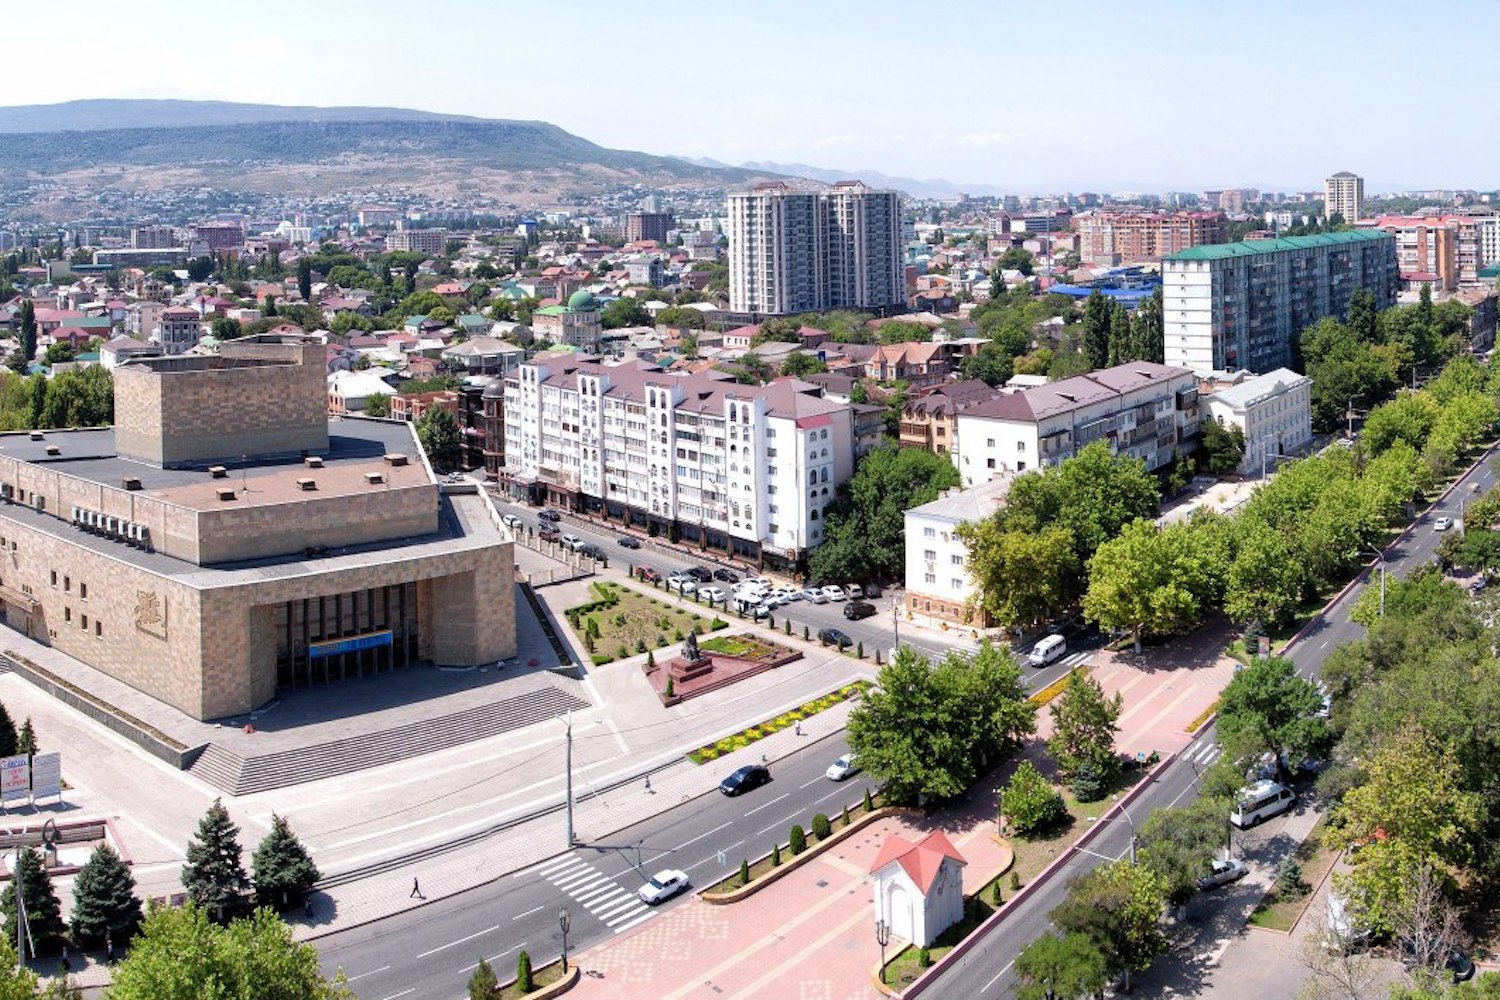 A view of central Makhachkala. Image: Shamil Magomedov/Wikimedia Commons under a CC licence